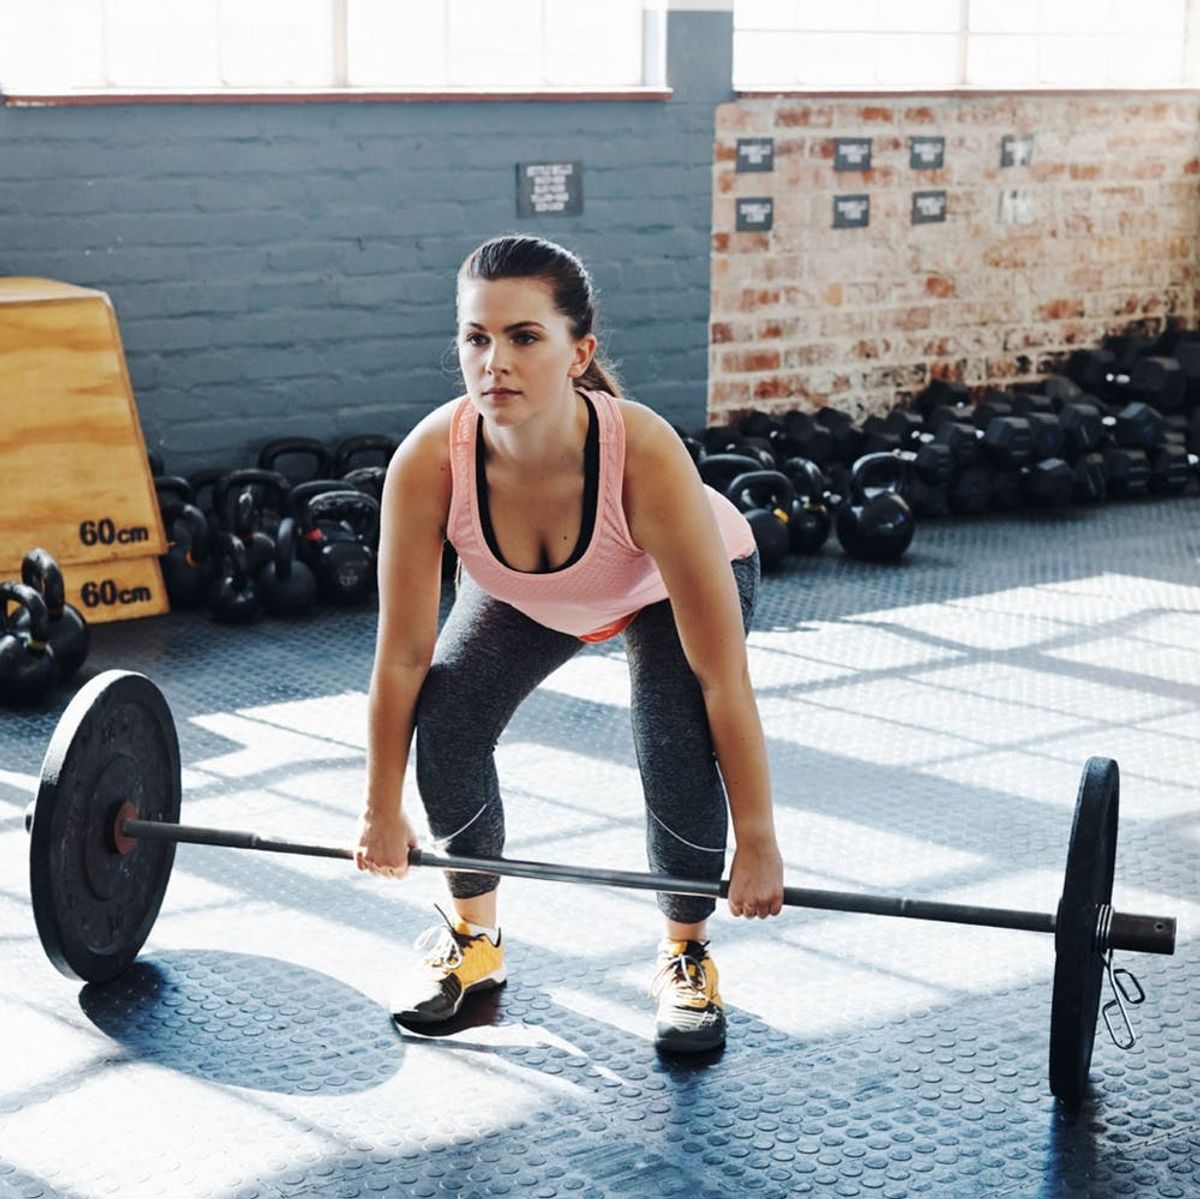 6 Machines You Should Avoid at the Gym (+ What to Do Instead)